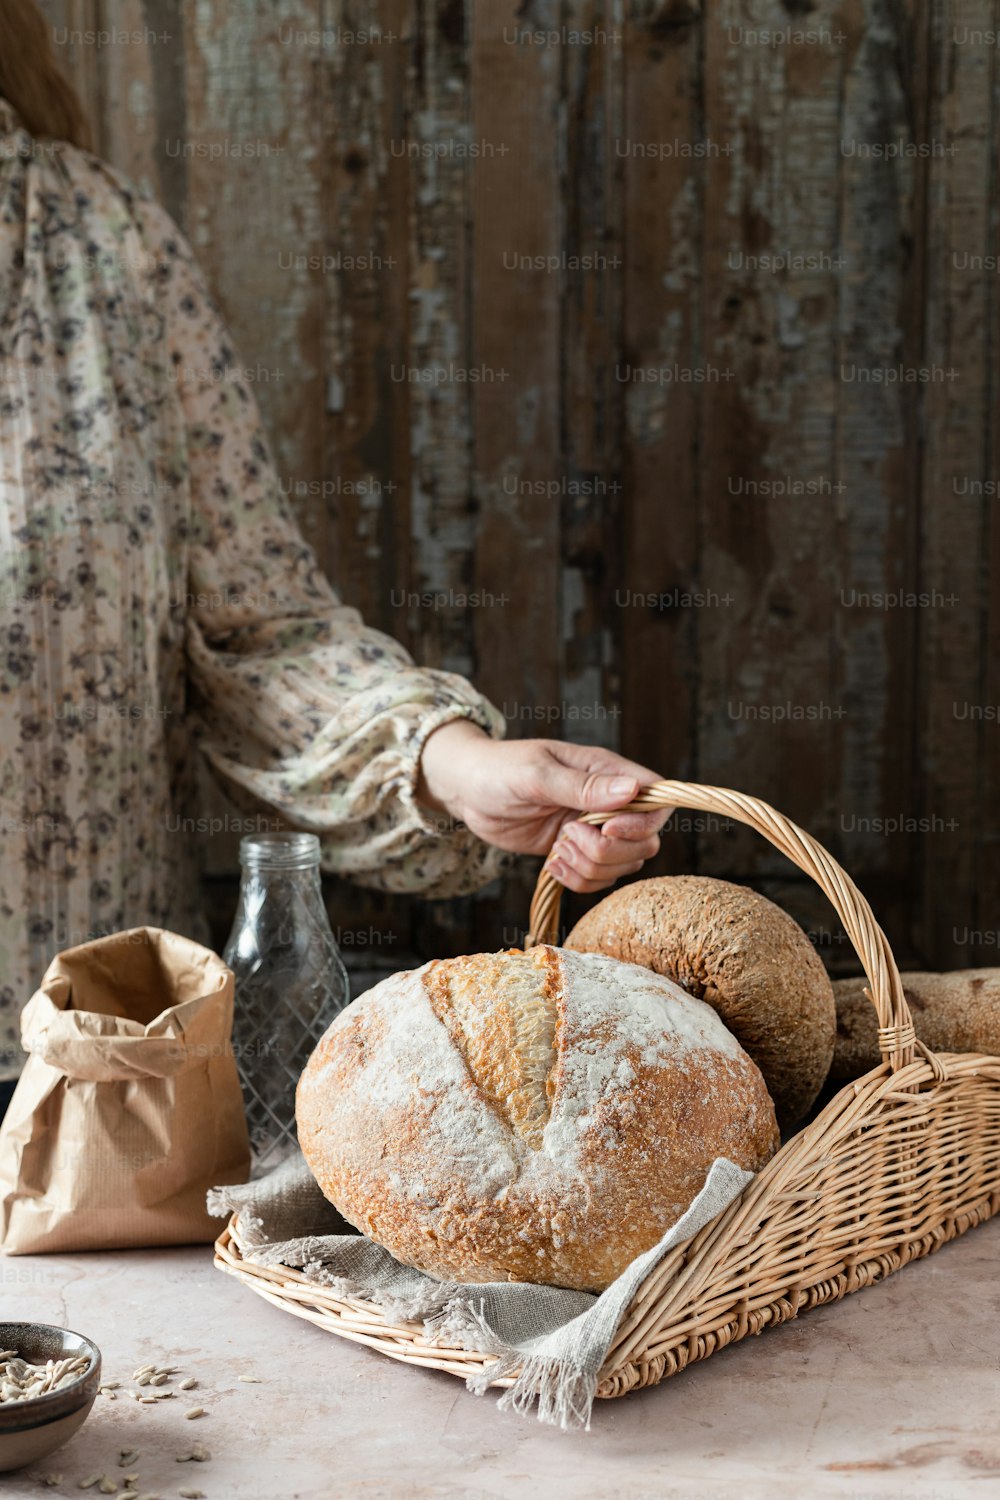 a woman is holding a basket of bread